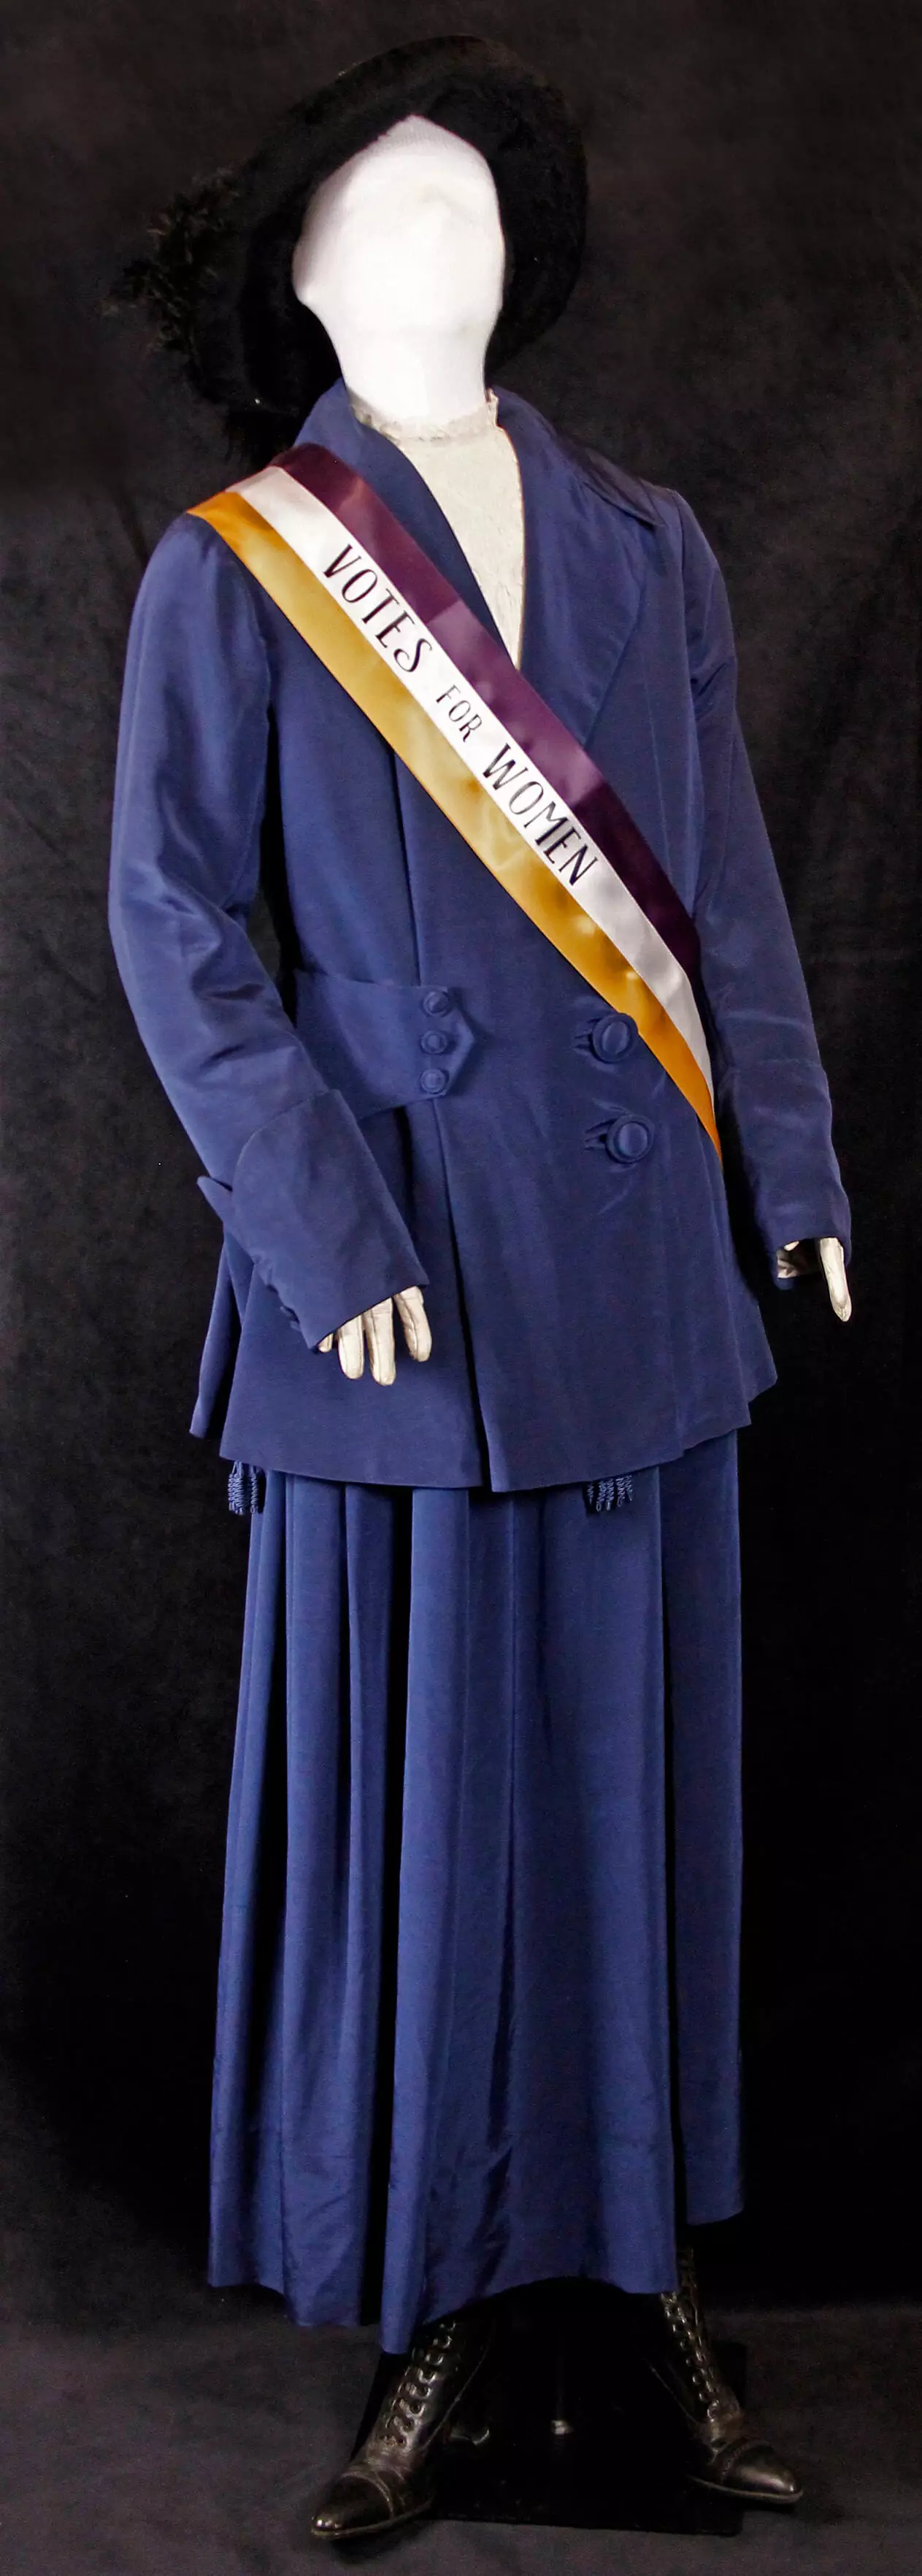 Mannequin dressed in blue velvet women's skirt and jacket, and black hat. A yellow and purple sash reads 'Votes for Women'